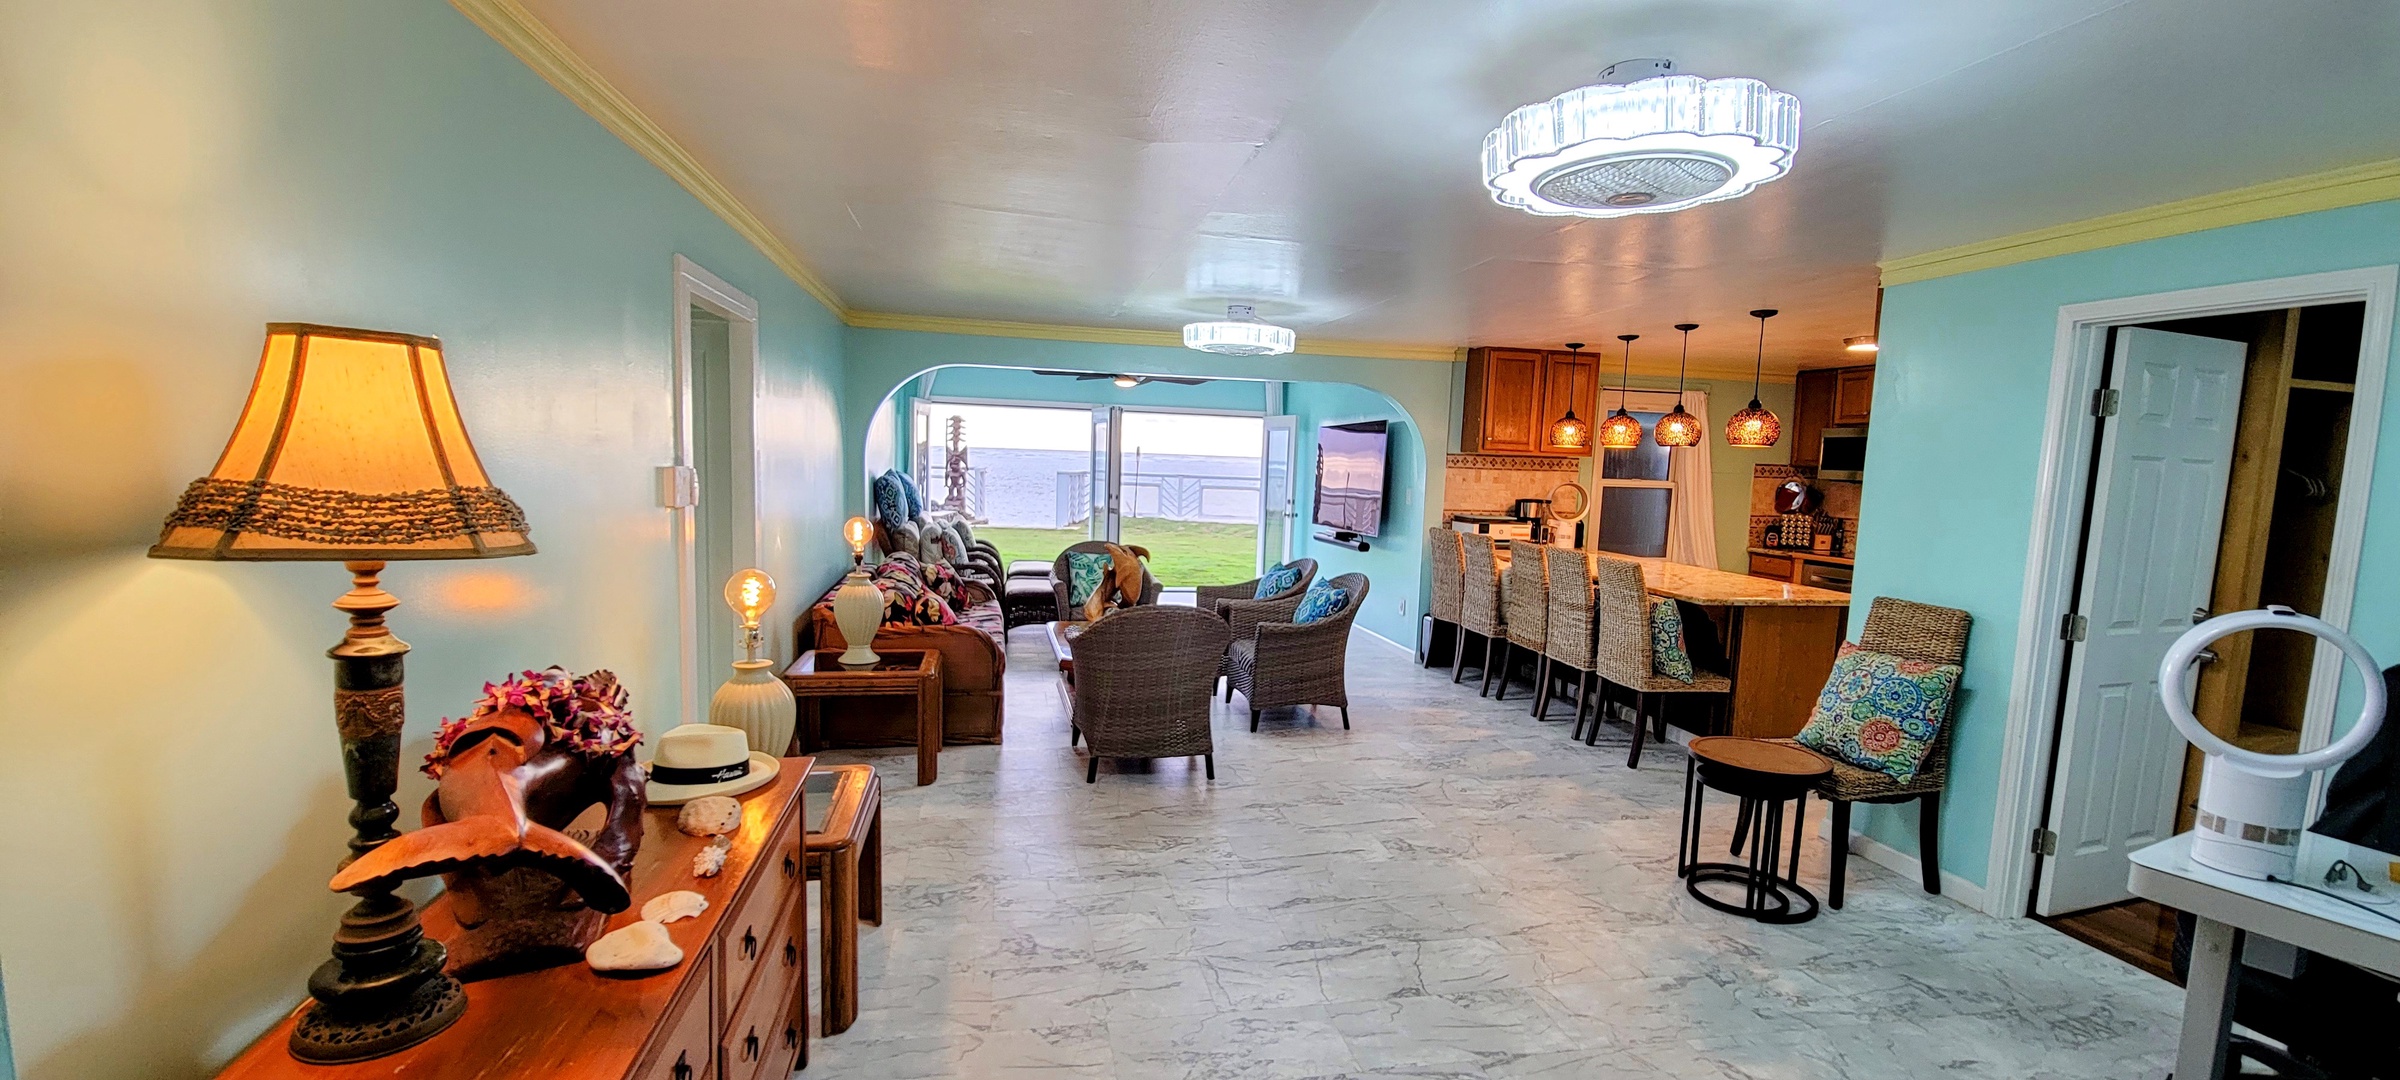 Hauula Vacation Rentals, Paradise Reef Retreat - Experience ultimate entertainment in the living area, boasting an 80-inch 8K QLED TV and an immersive 11.1 surround sound system.